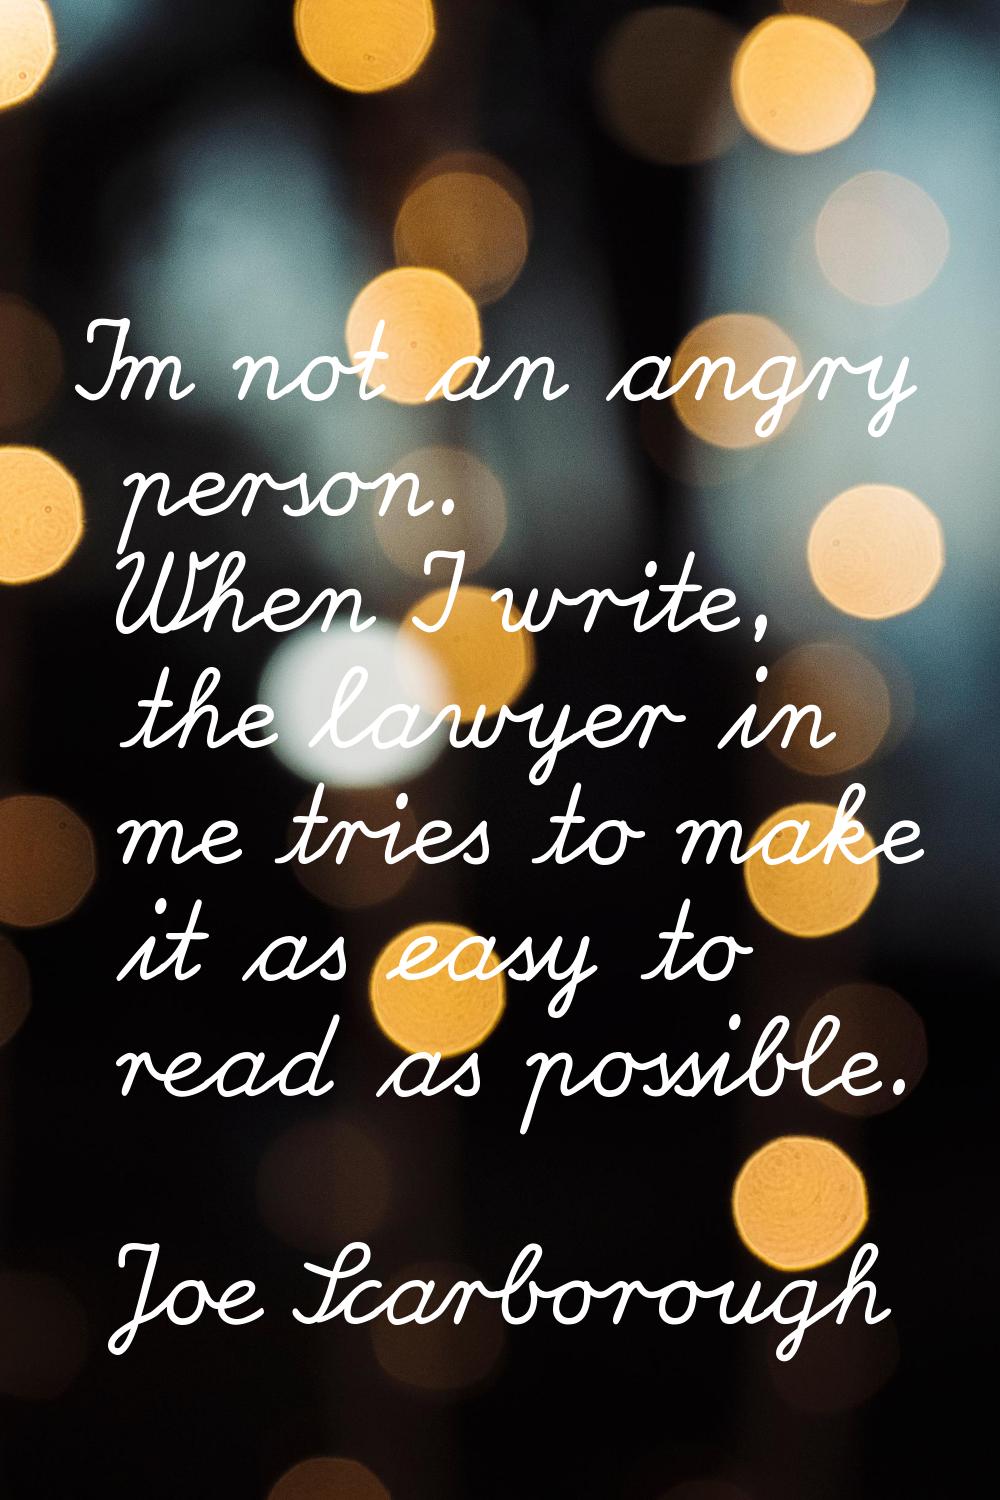 I'm not an angry person. When I write, the lawyer in me tries to make it as easy to read as possibl